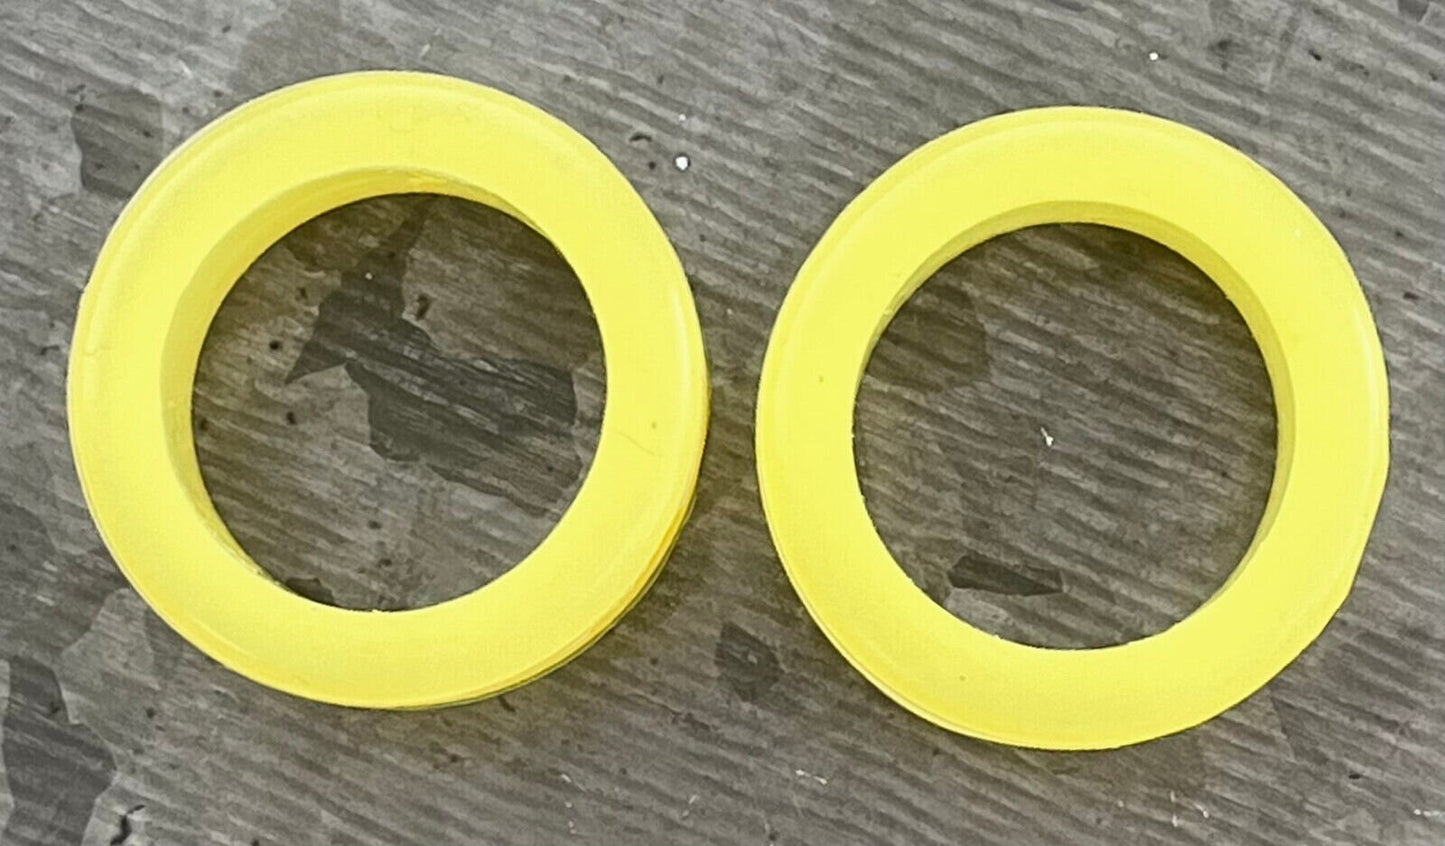 PAIR of Brilliant Yellow Silicone Double Flare Tunnels - Gauges 6g (4mm) up to 1" (25mm) available!